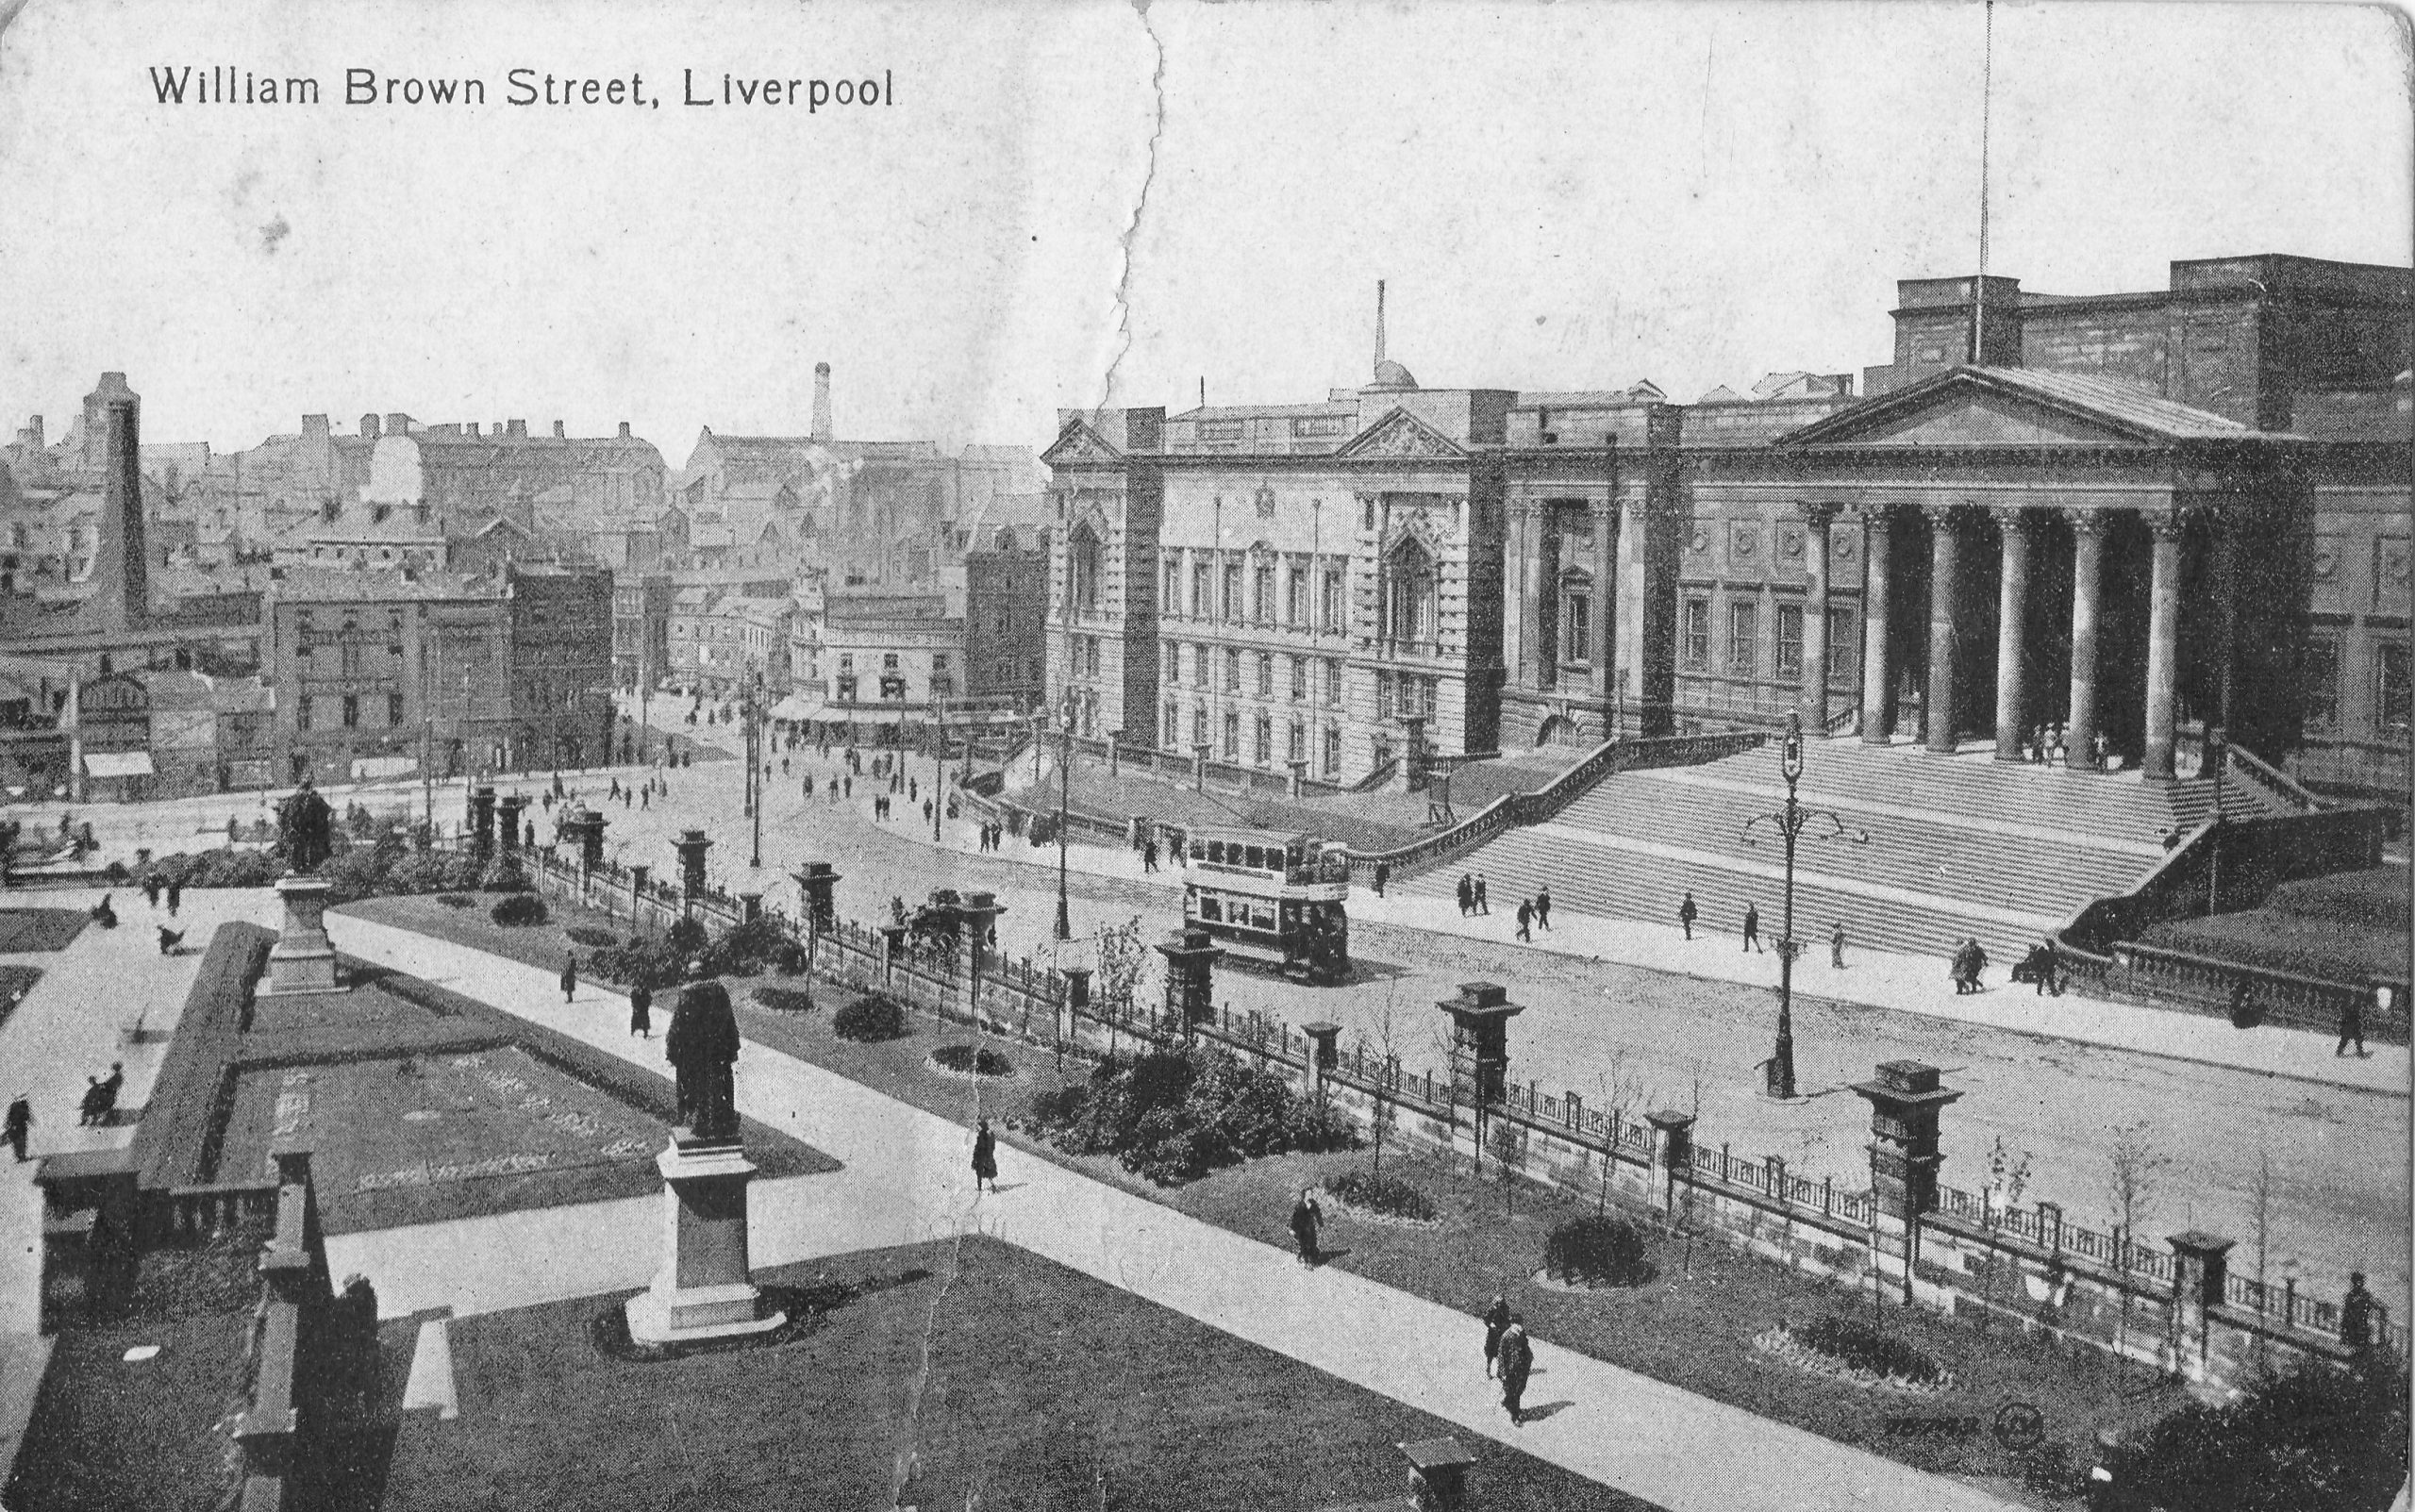 Photograph of William Brown Street, Liverpool, looking west